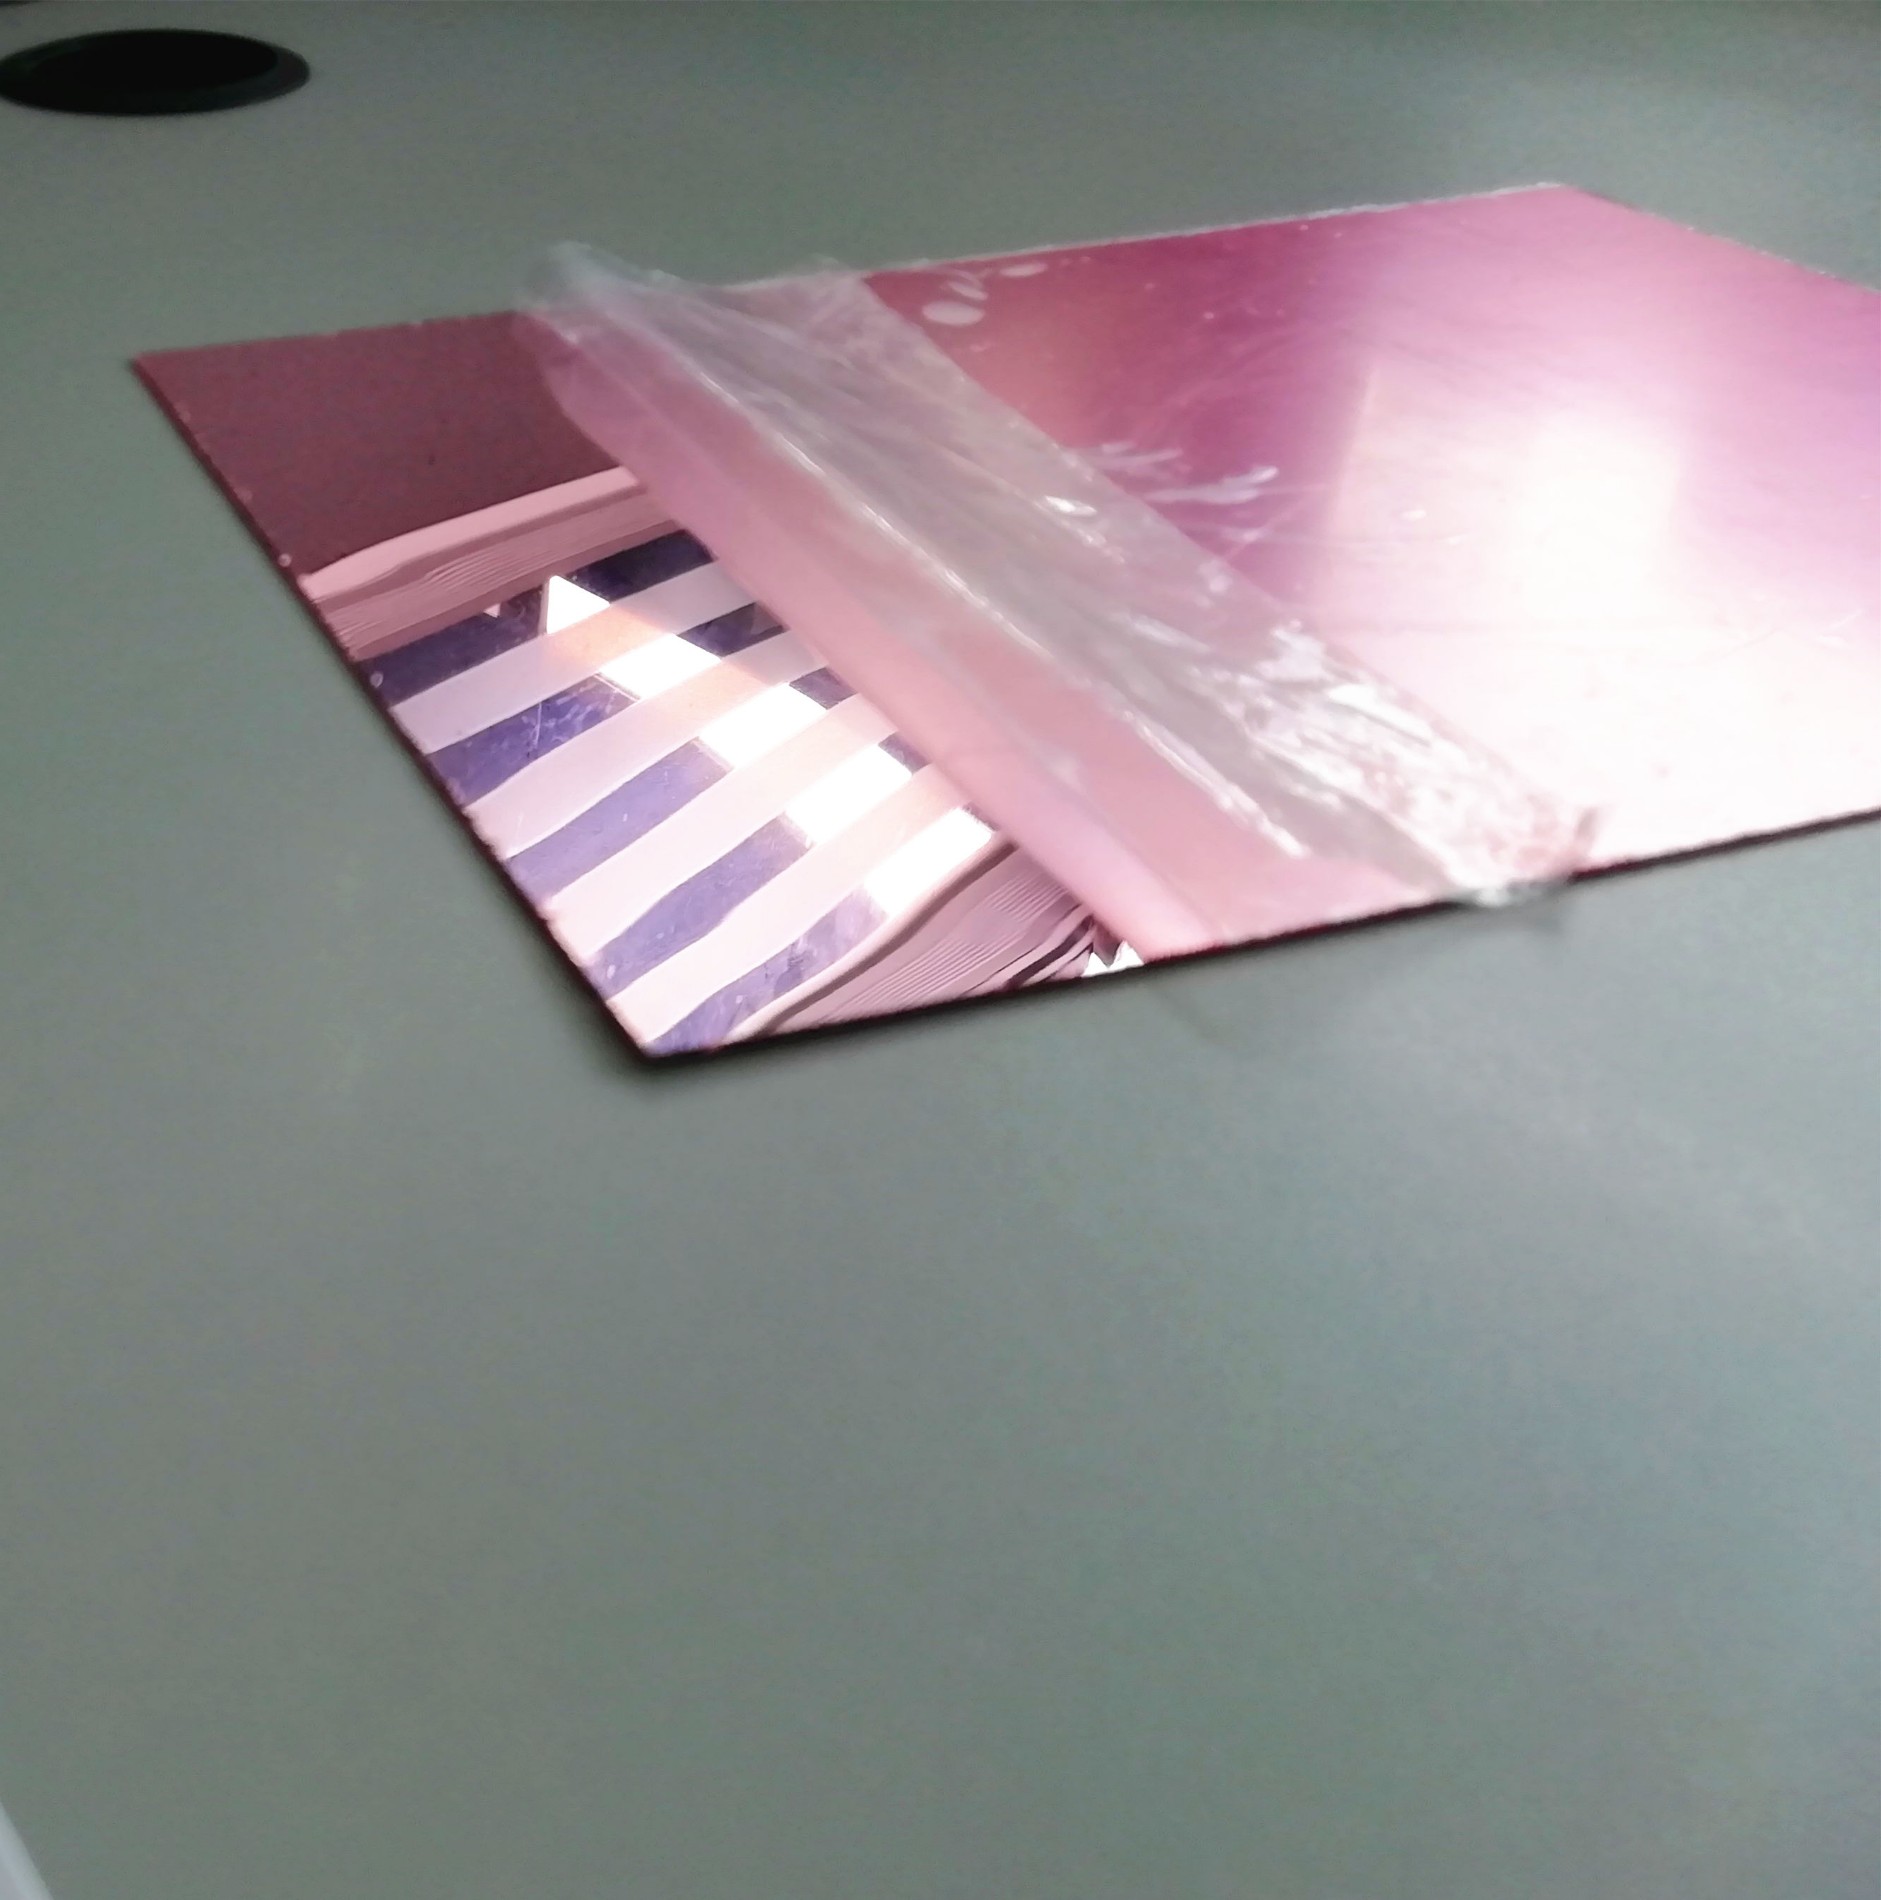 1m 2mm 3mm silver and gold acrylic mirror sheet Manufacturers, 1m 2mm 3mm silver and gold acrylic mirror sheet Factory, Supply 1m 2mm 3mm silver and gold acrylic mirror sheet